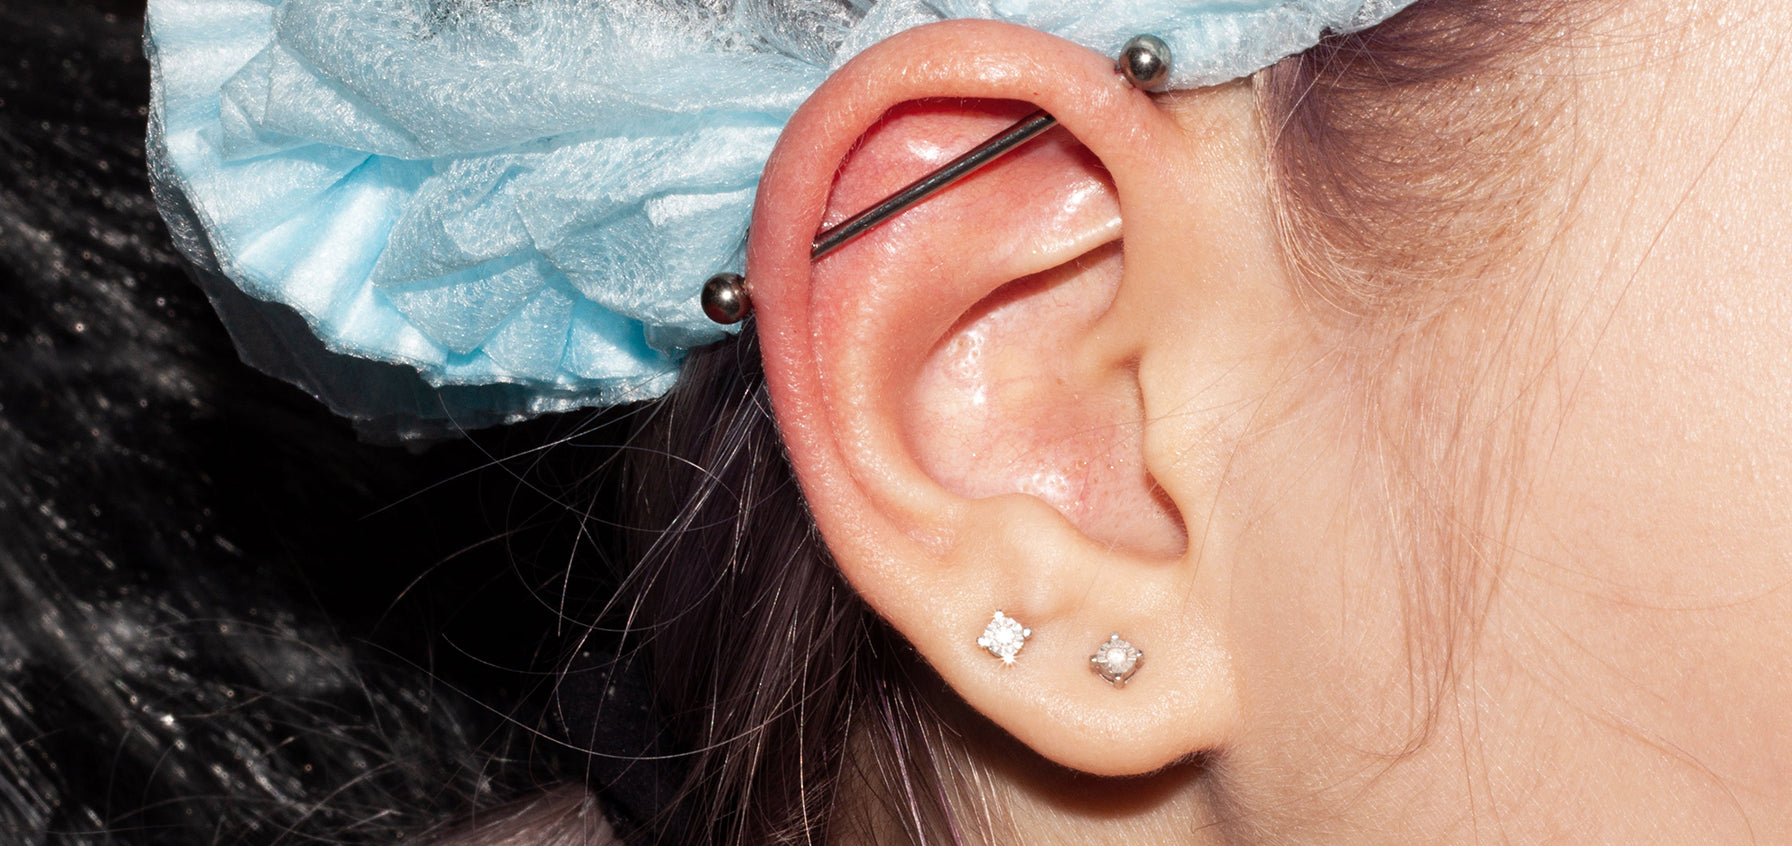 9 Types of Ear Piercings, From Lobes to Cartilage